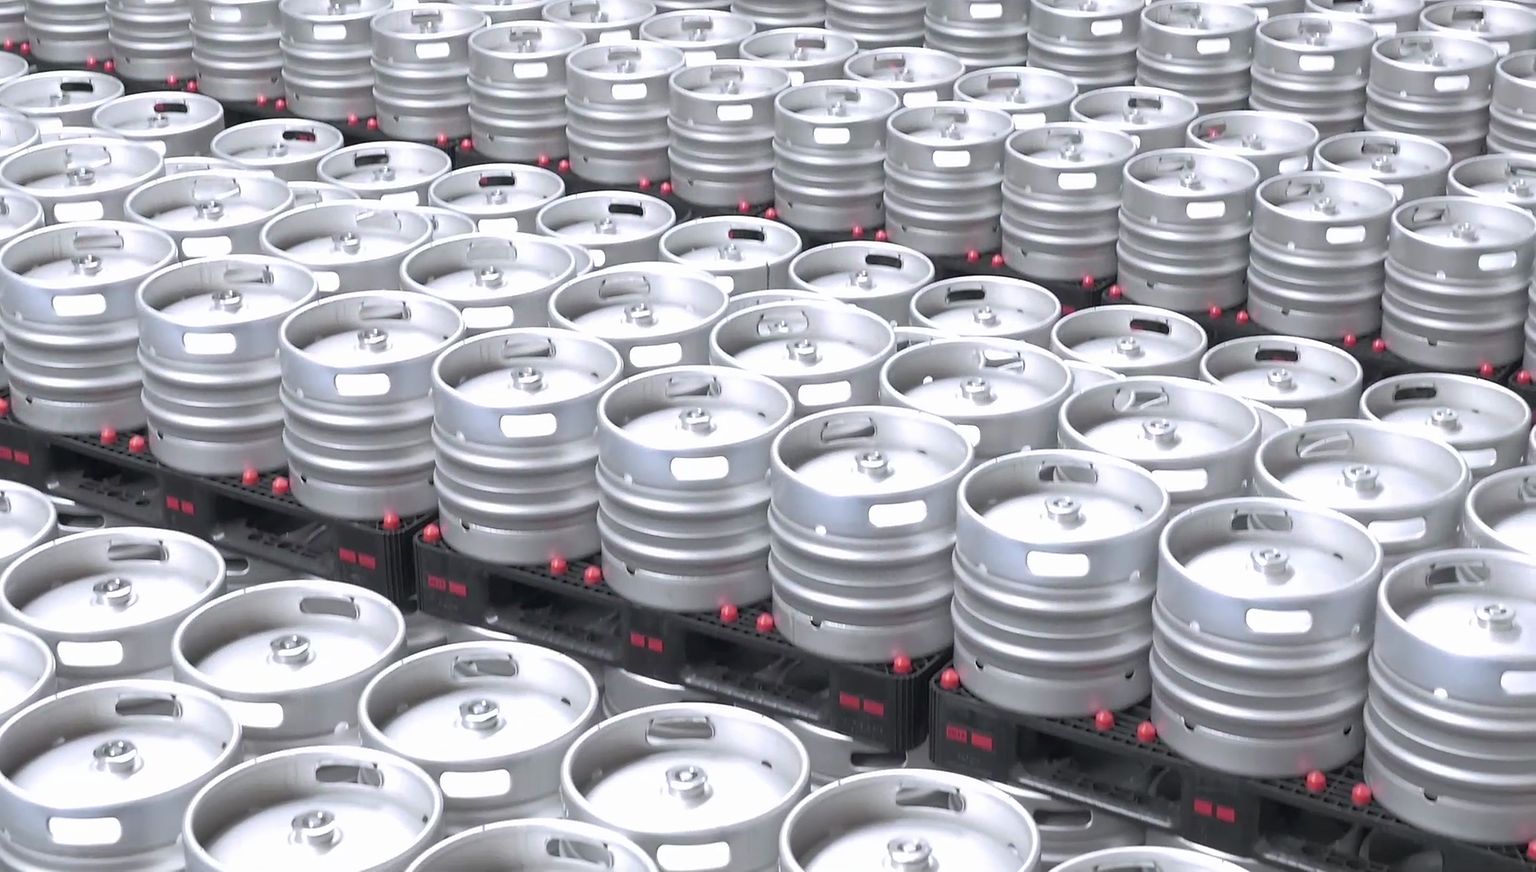 The new keg production plant of Entinox at Zaragoza, Spain, has a capacity for 450,000 barrels per year, made from austenite stainless steel with a surface of 2 square meters per barrel